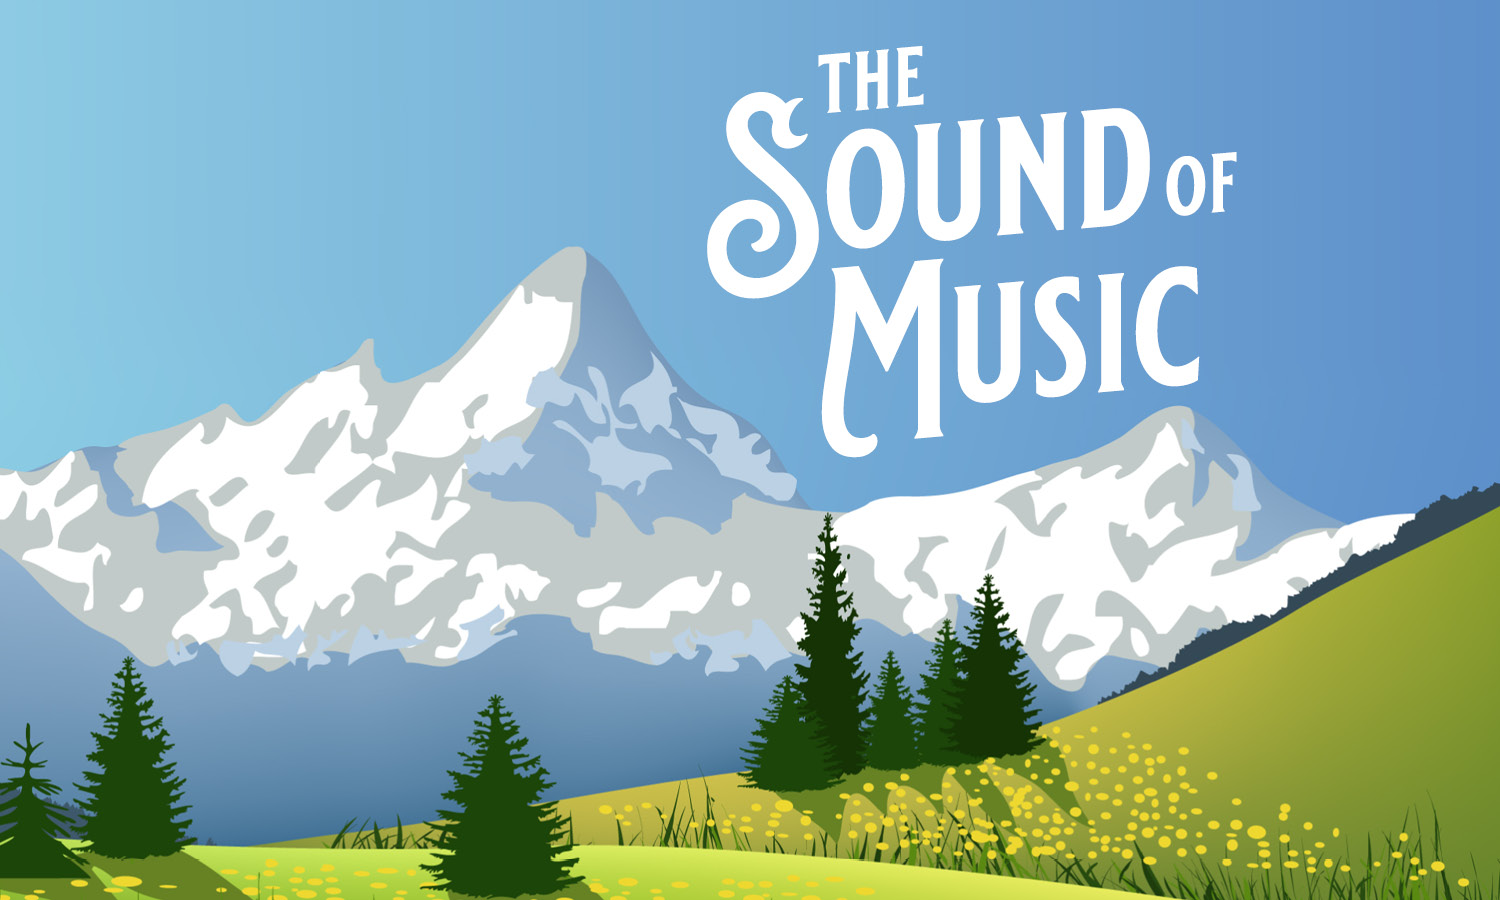 Illustration of field and trees with mountain range in the background. Text: The Sound of Music